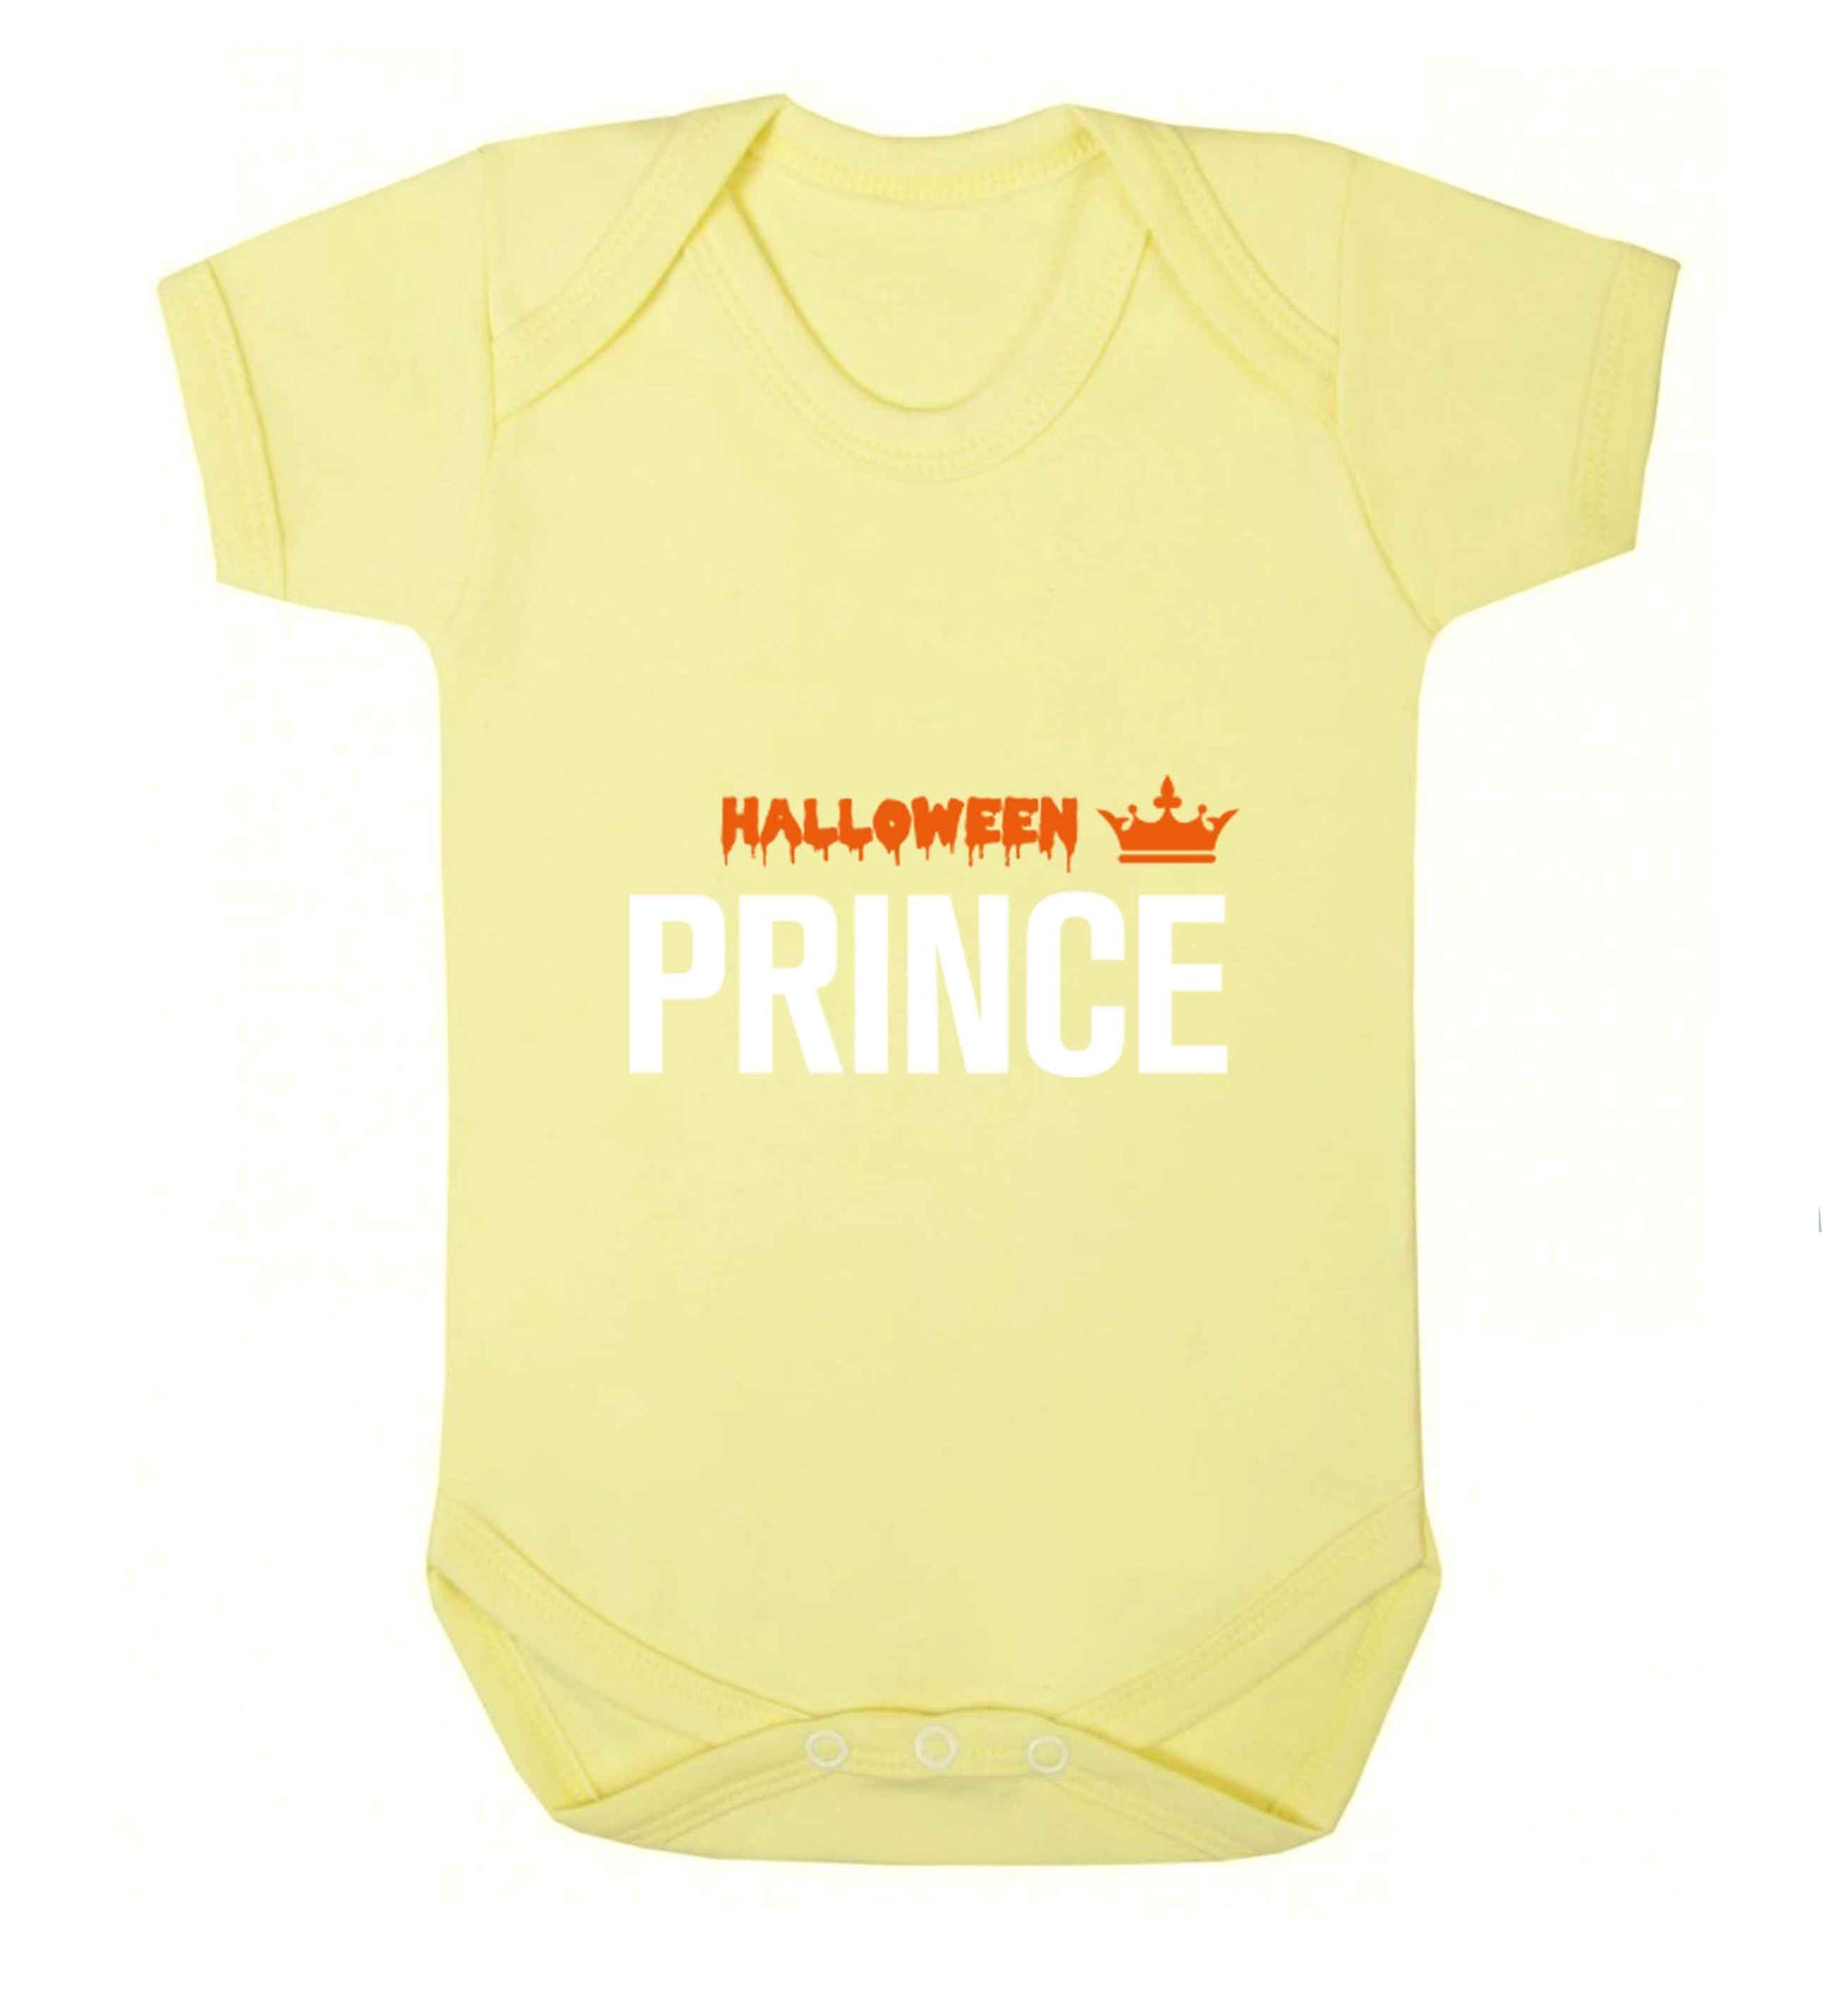 Halloween prince baby vest pale yellow 18-24 months